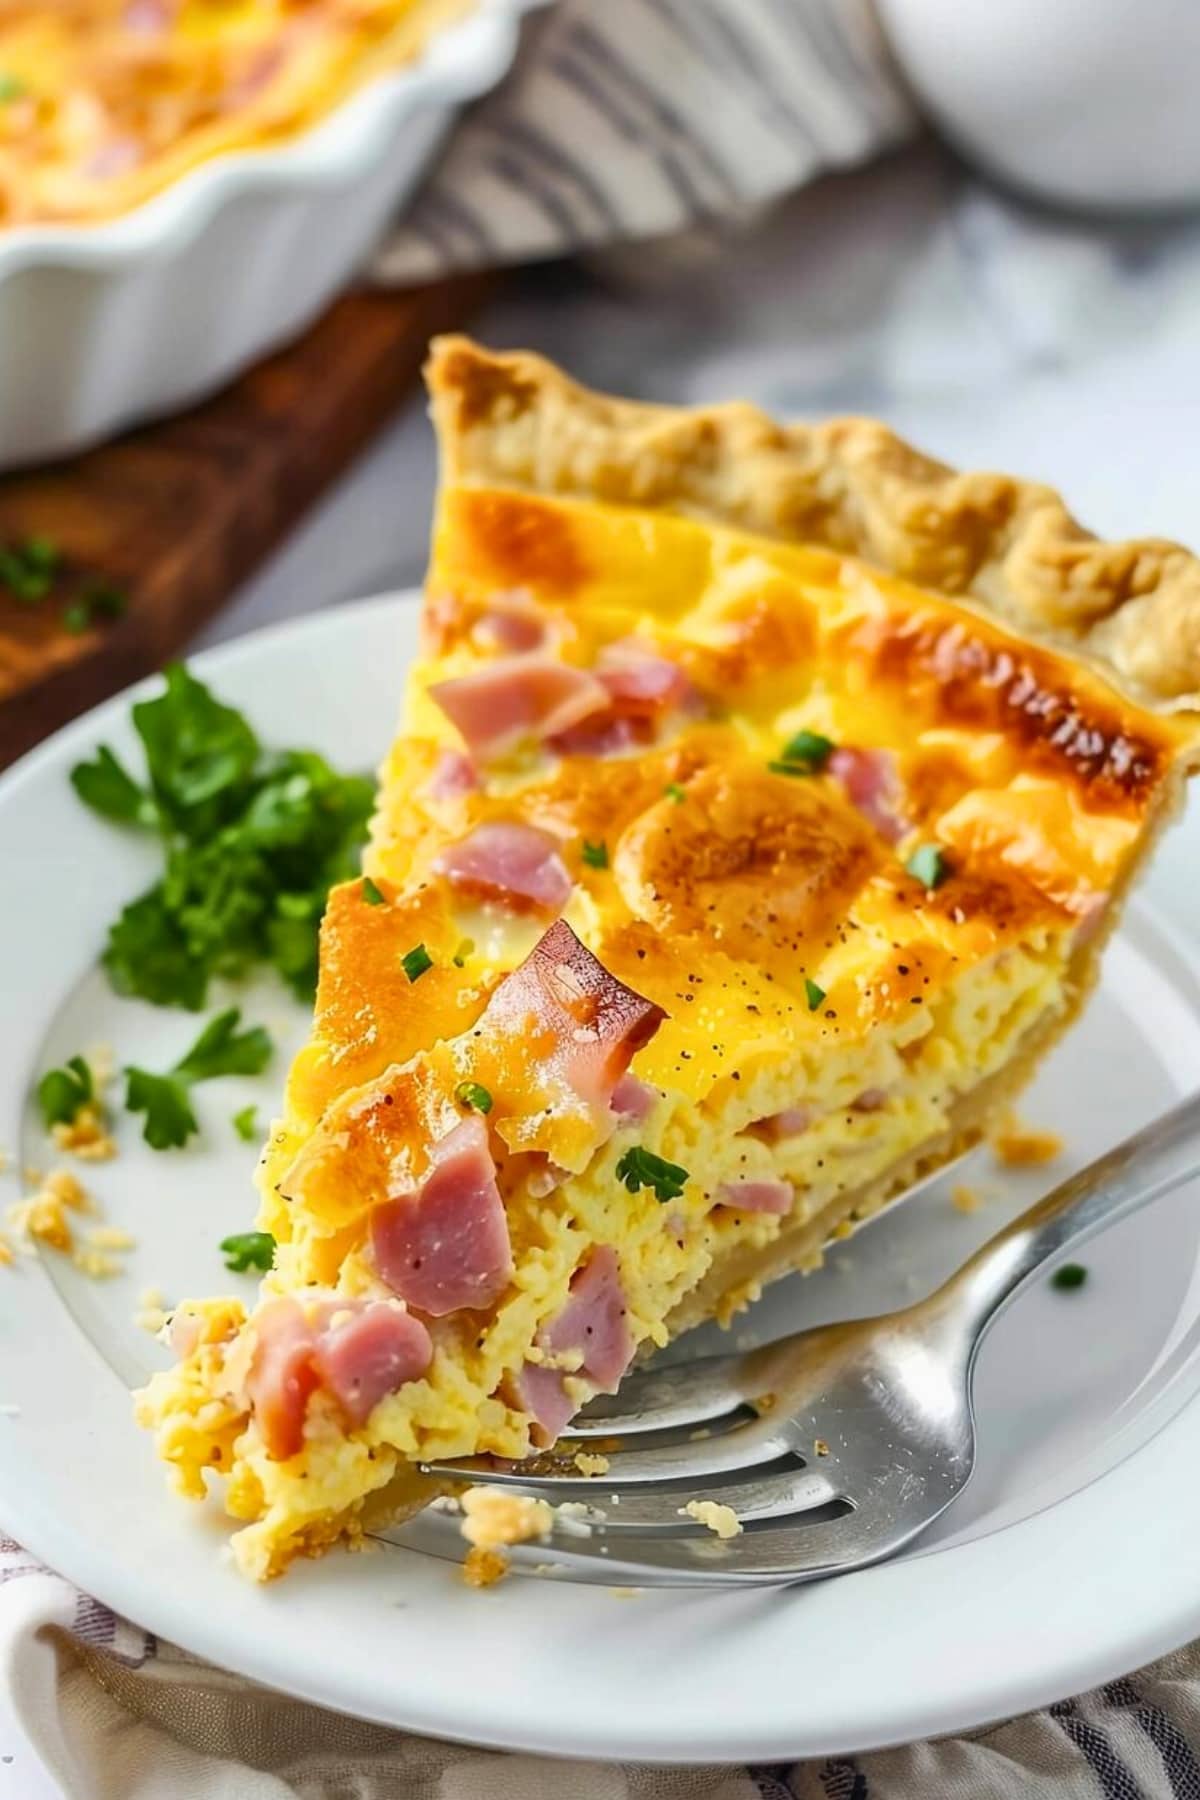 A slice of ham and cheese quiche in a white plate garnished with chopped parsley.